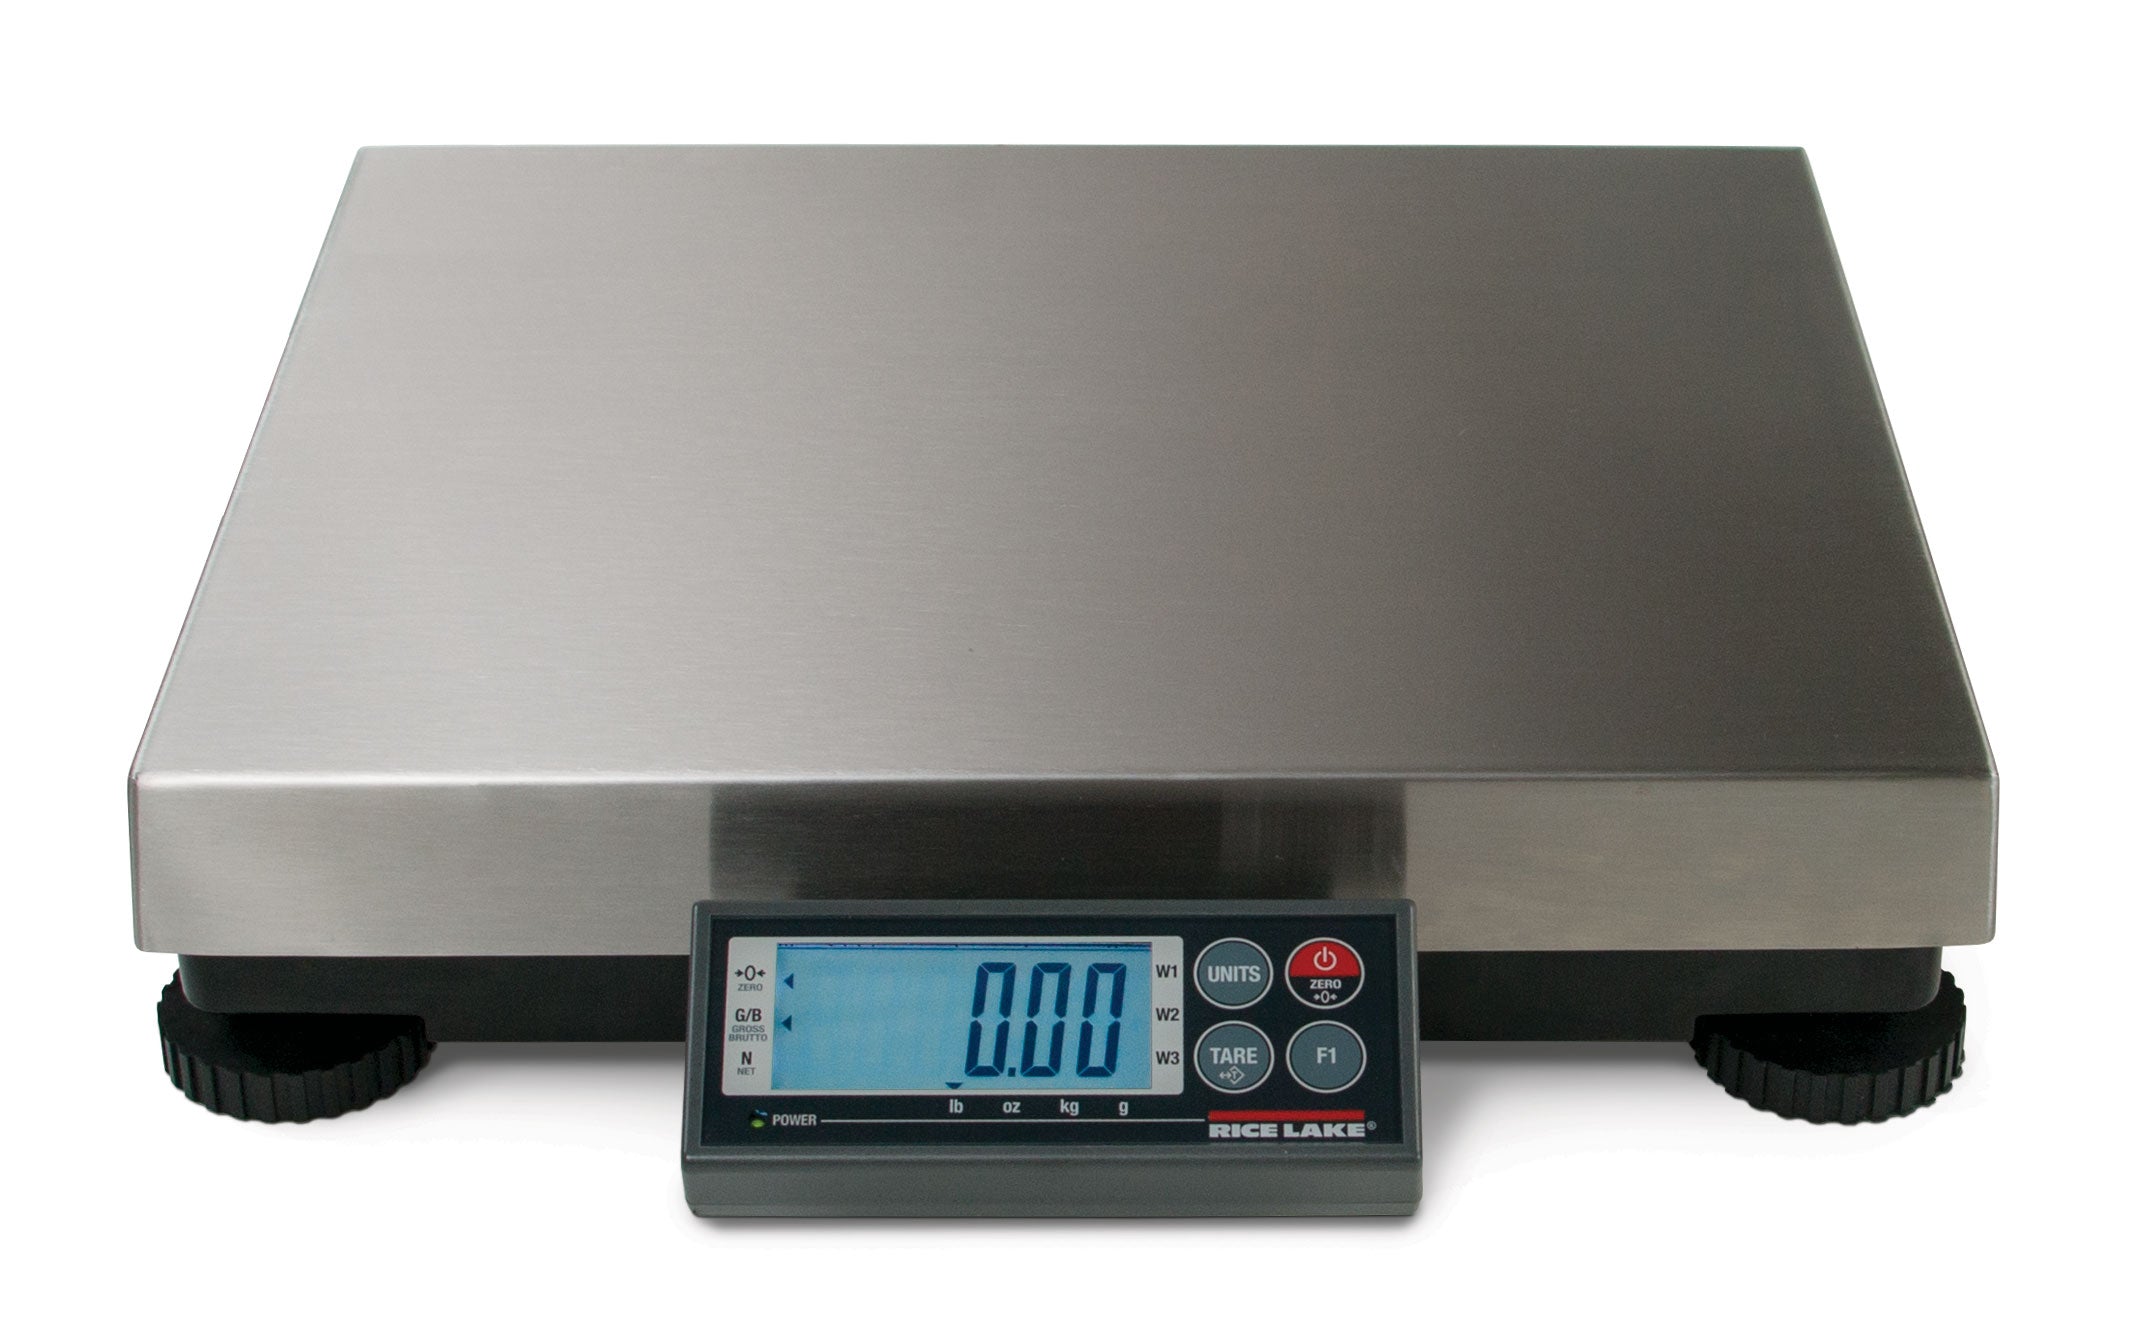 Rice Lake 182382 300 x 0.1 lb/150 x 0.05kg, BP 1818-150S Shipping Digital Scale, SS Weight Platter with 2 years Warranty